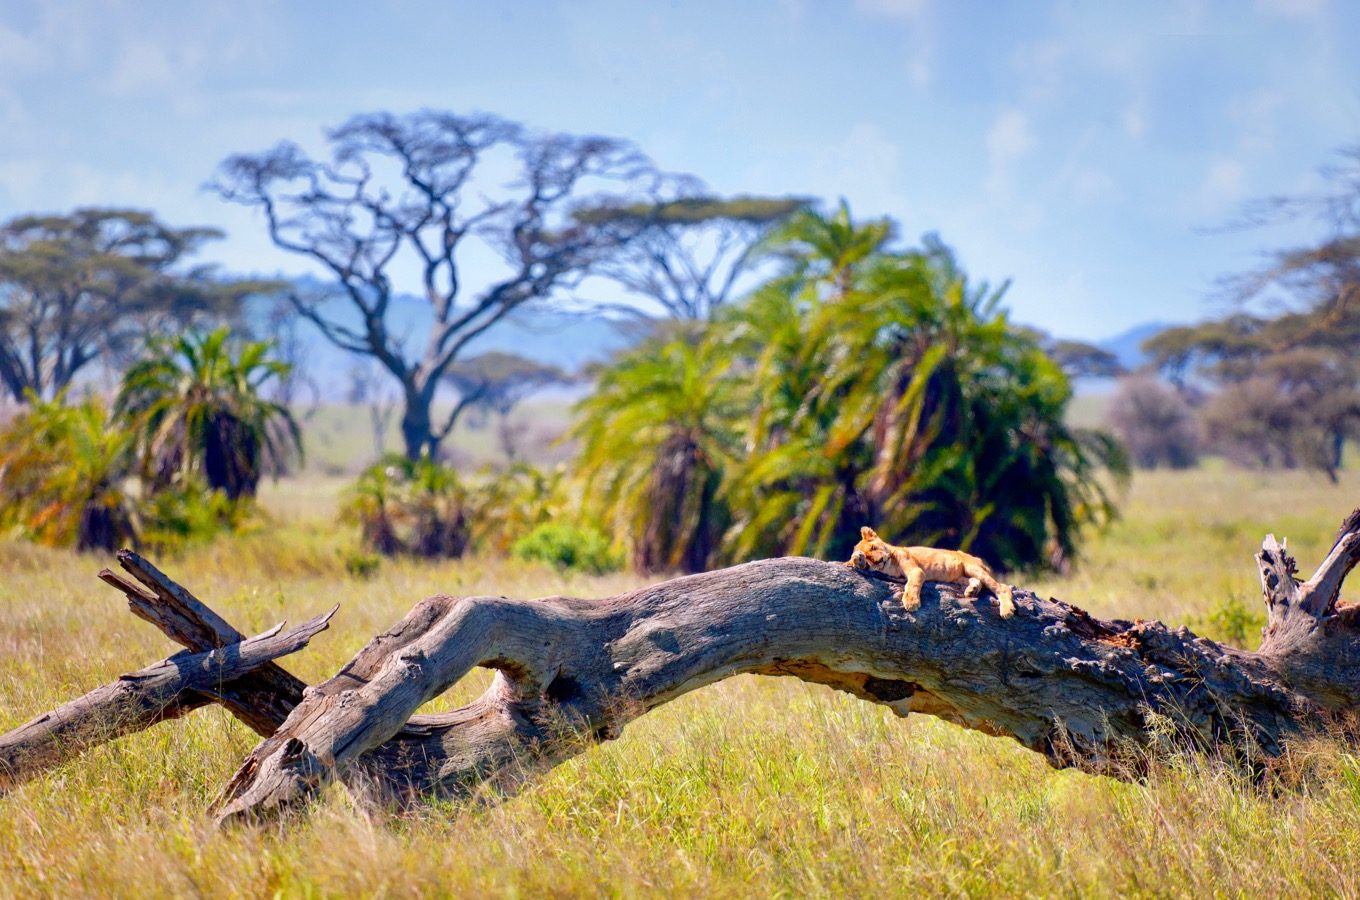 A young lion lying on a tree trunk in Serengeti National Park